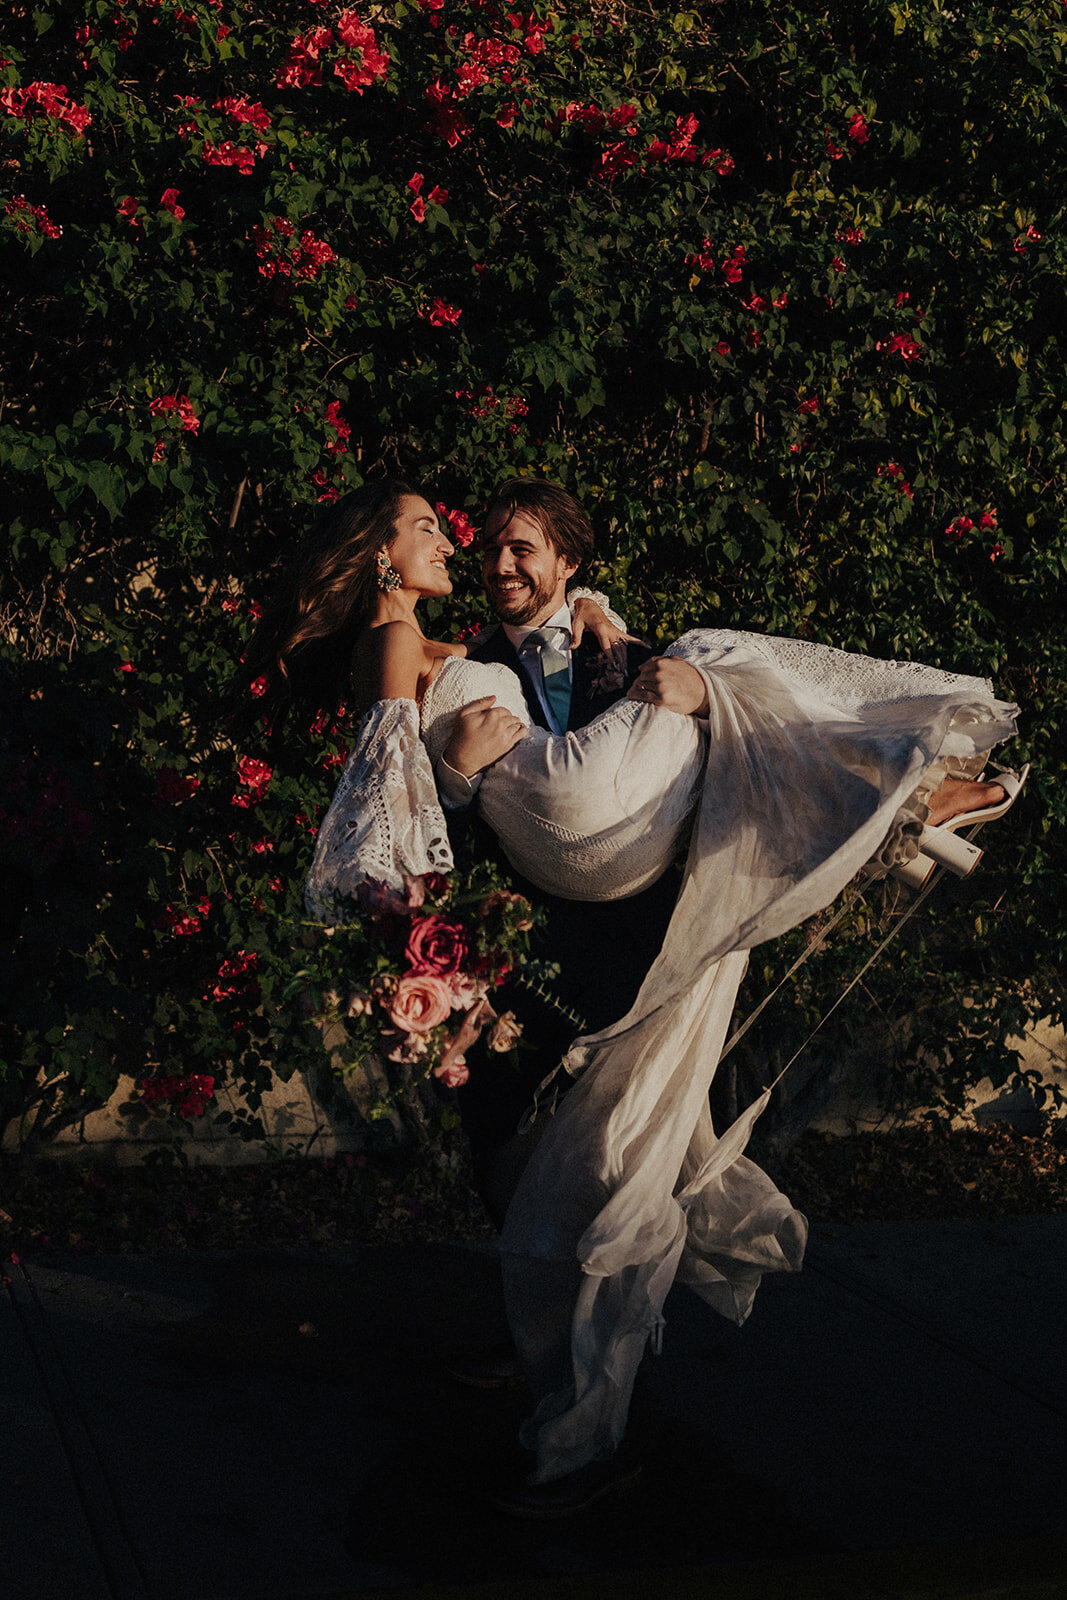 A handsome groom twirls his bride in front of a bougainvillea bush